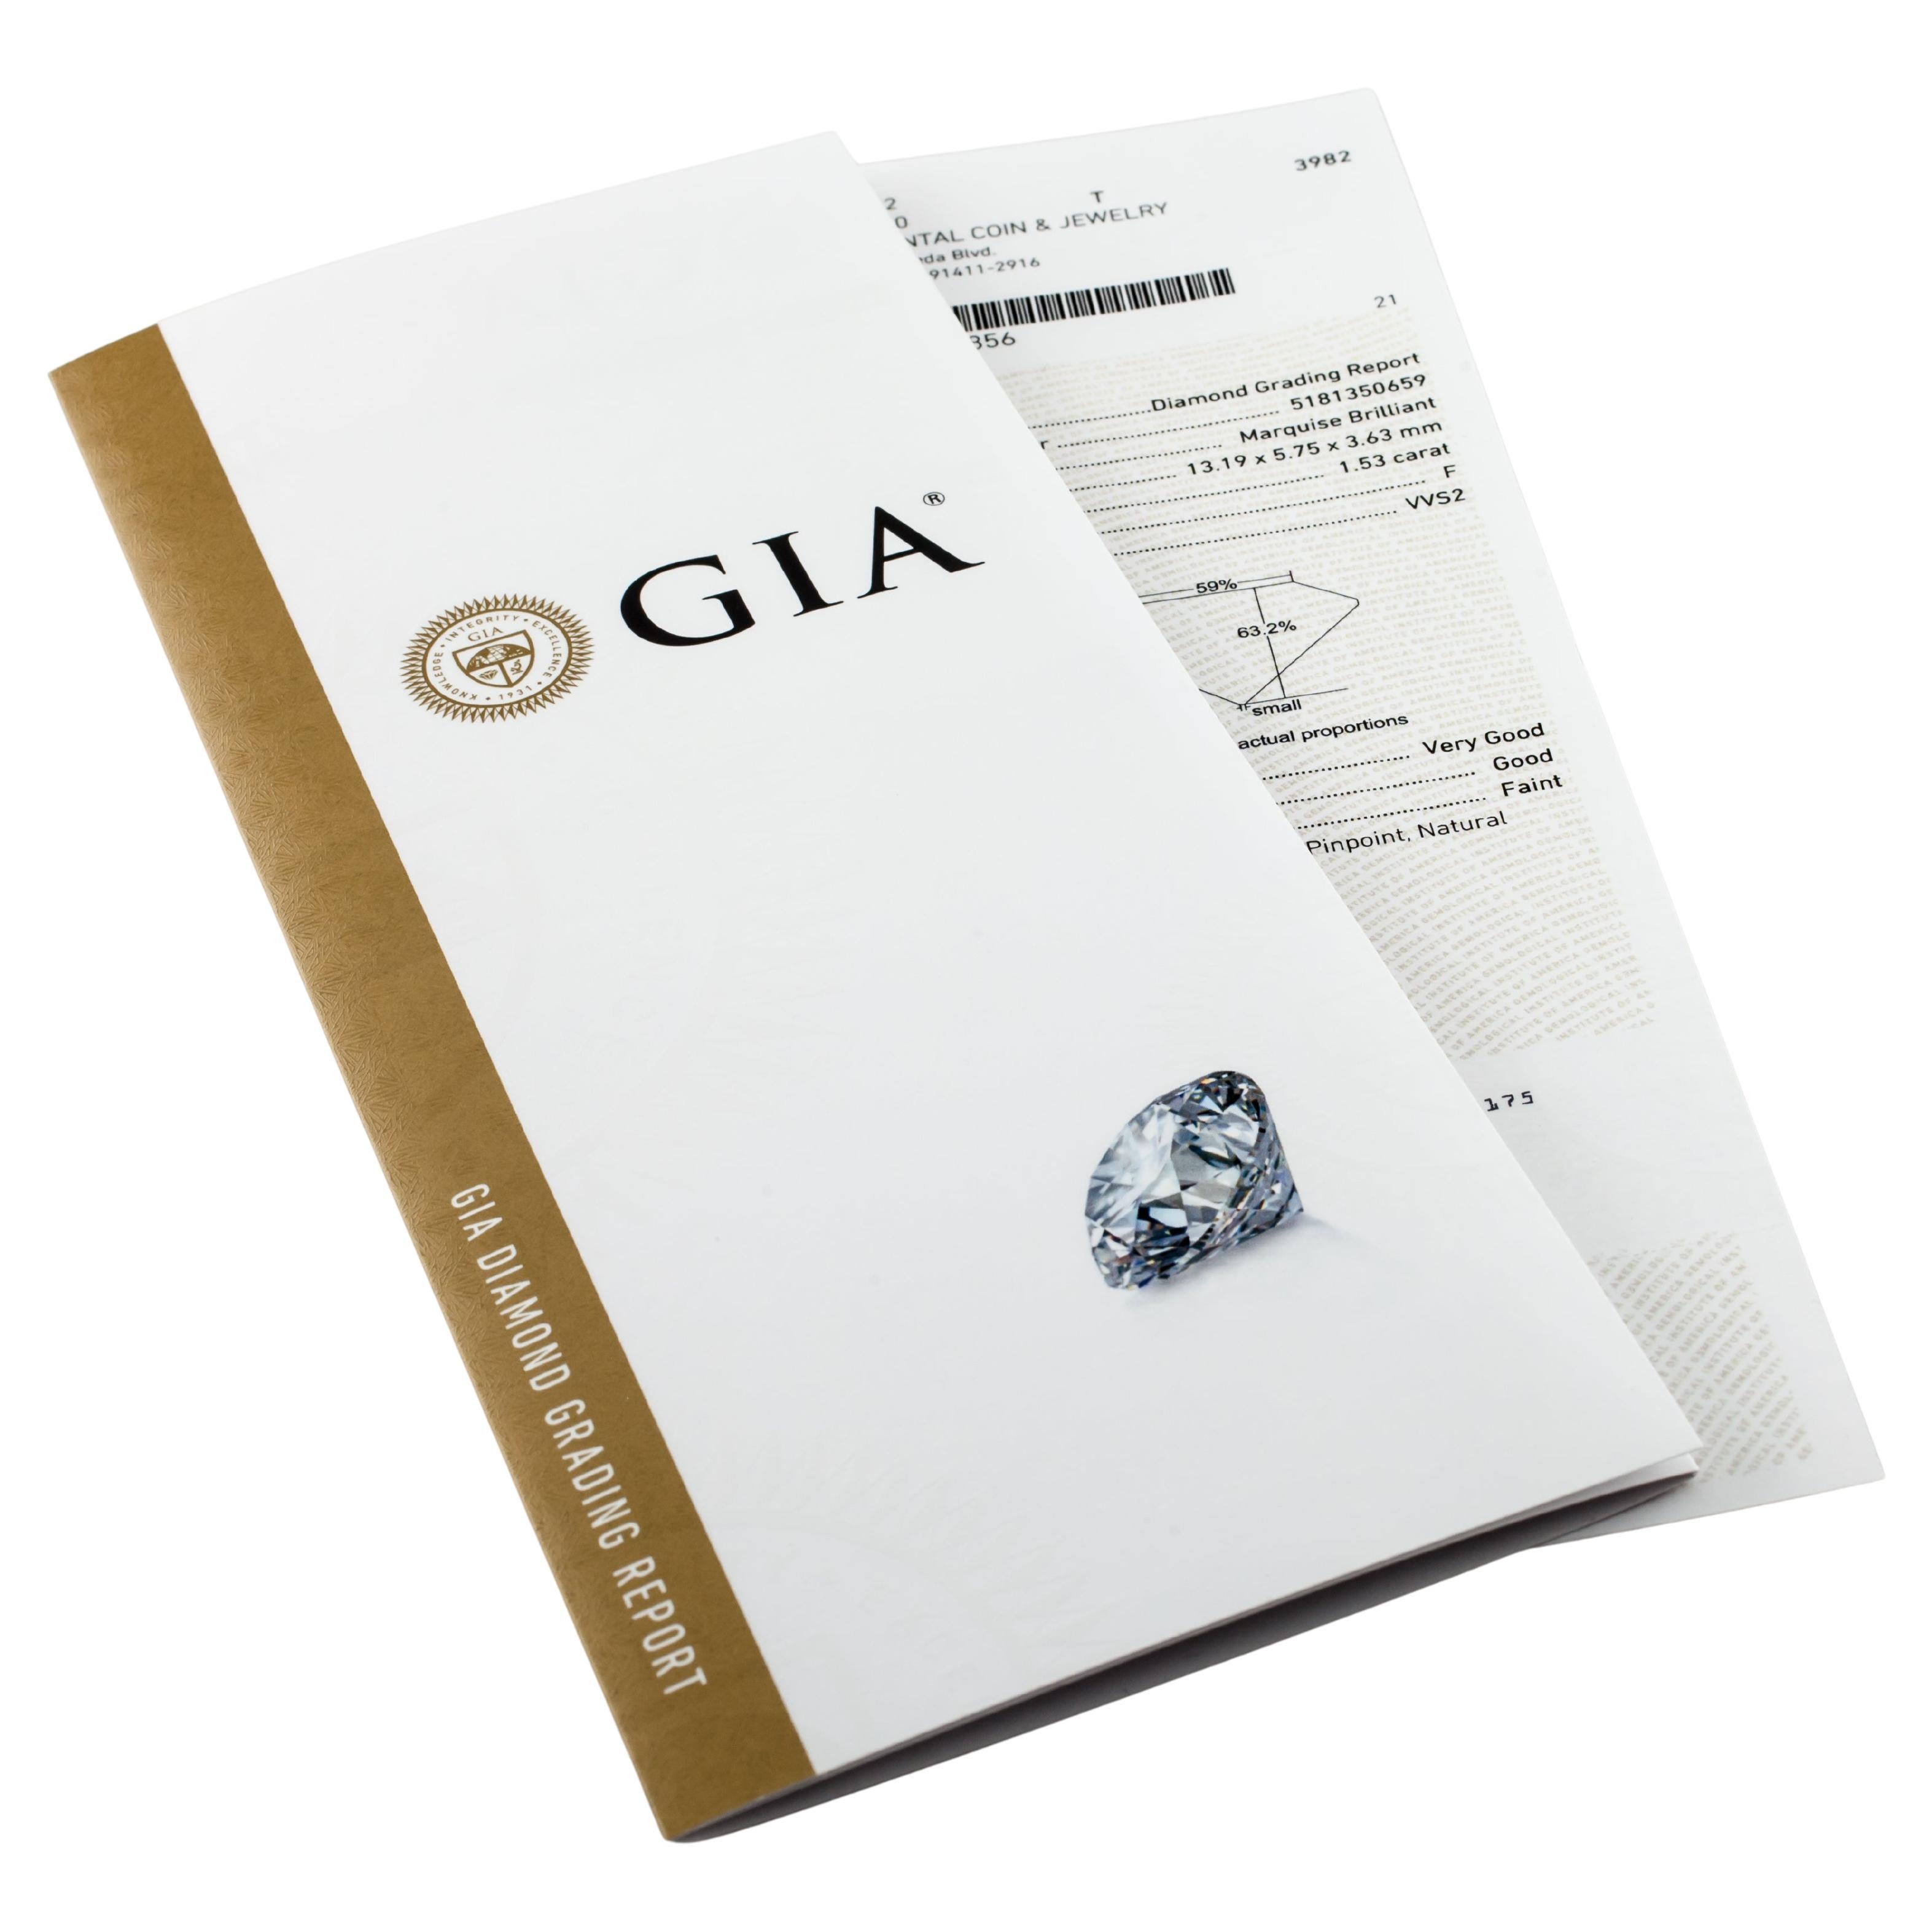 Diamond General Info
GIA Report Number: 5181350659
Diamond Cut: Marquise
Measurements: 13.19  x  5.75  -  3.63

Diamond Grading Results
Carat Weight: 1.53
Color Grade: F
Clarity Grade: VVS2

Additional Grading Information 
Polish: Very